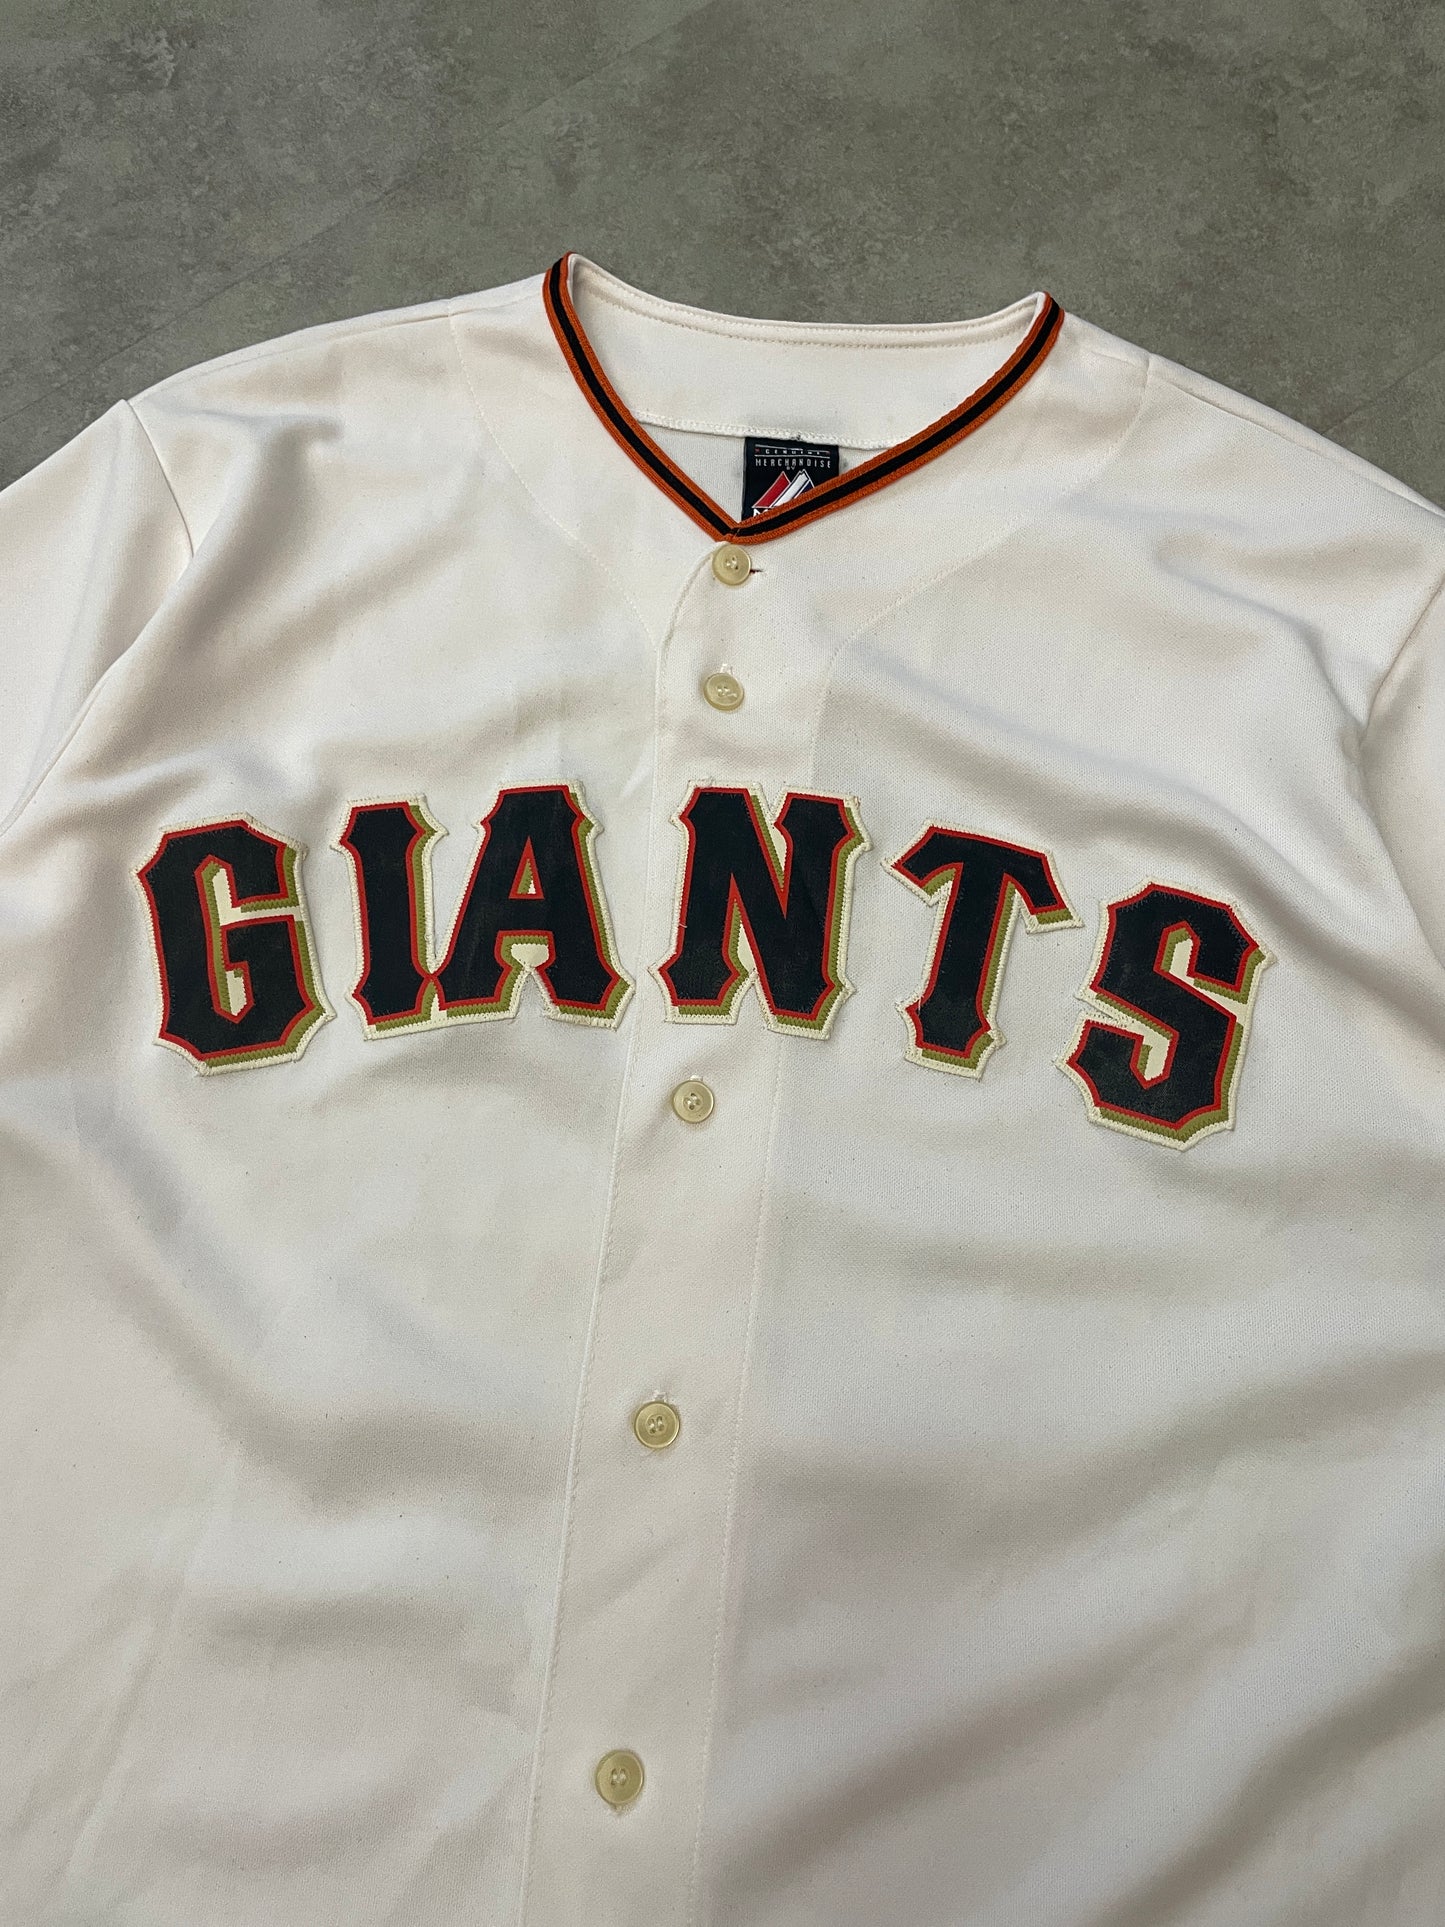 Giants Baseball Jersey (Large) dot stains very lite at the back